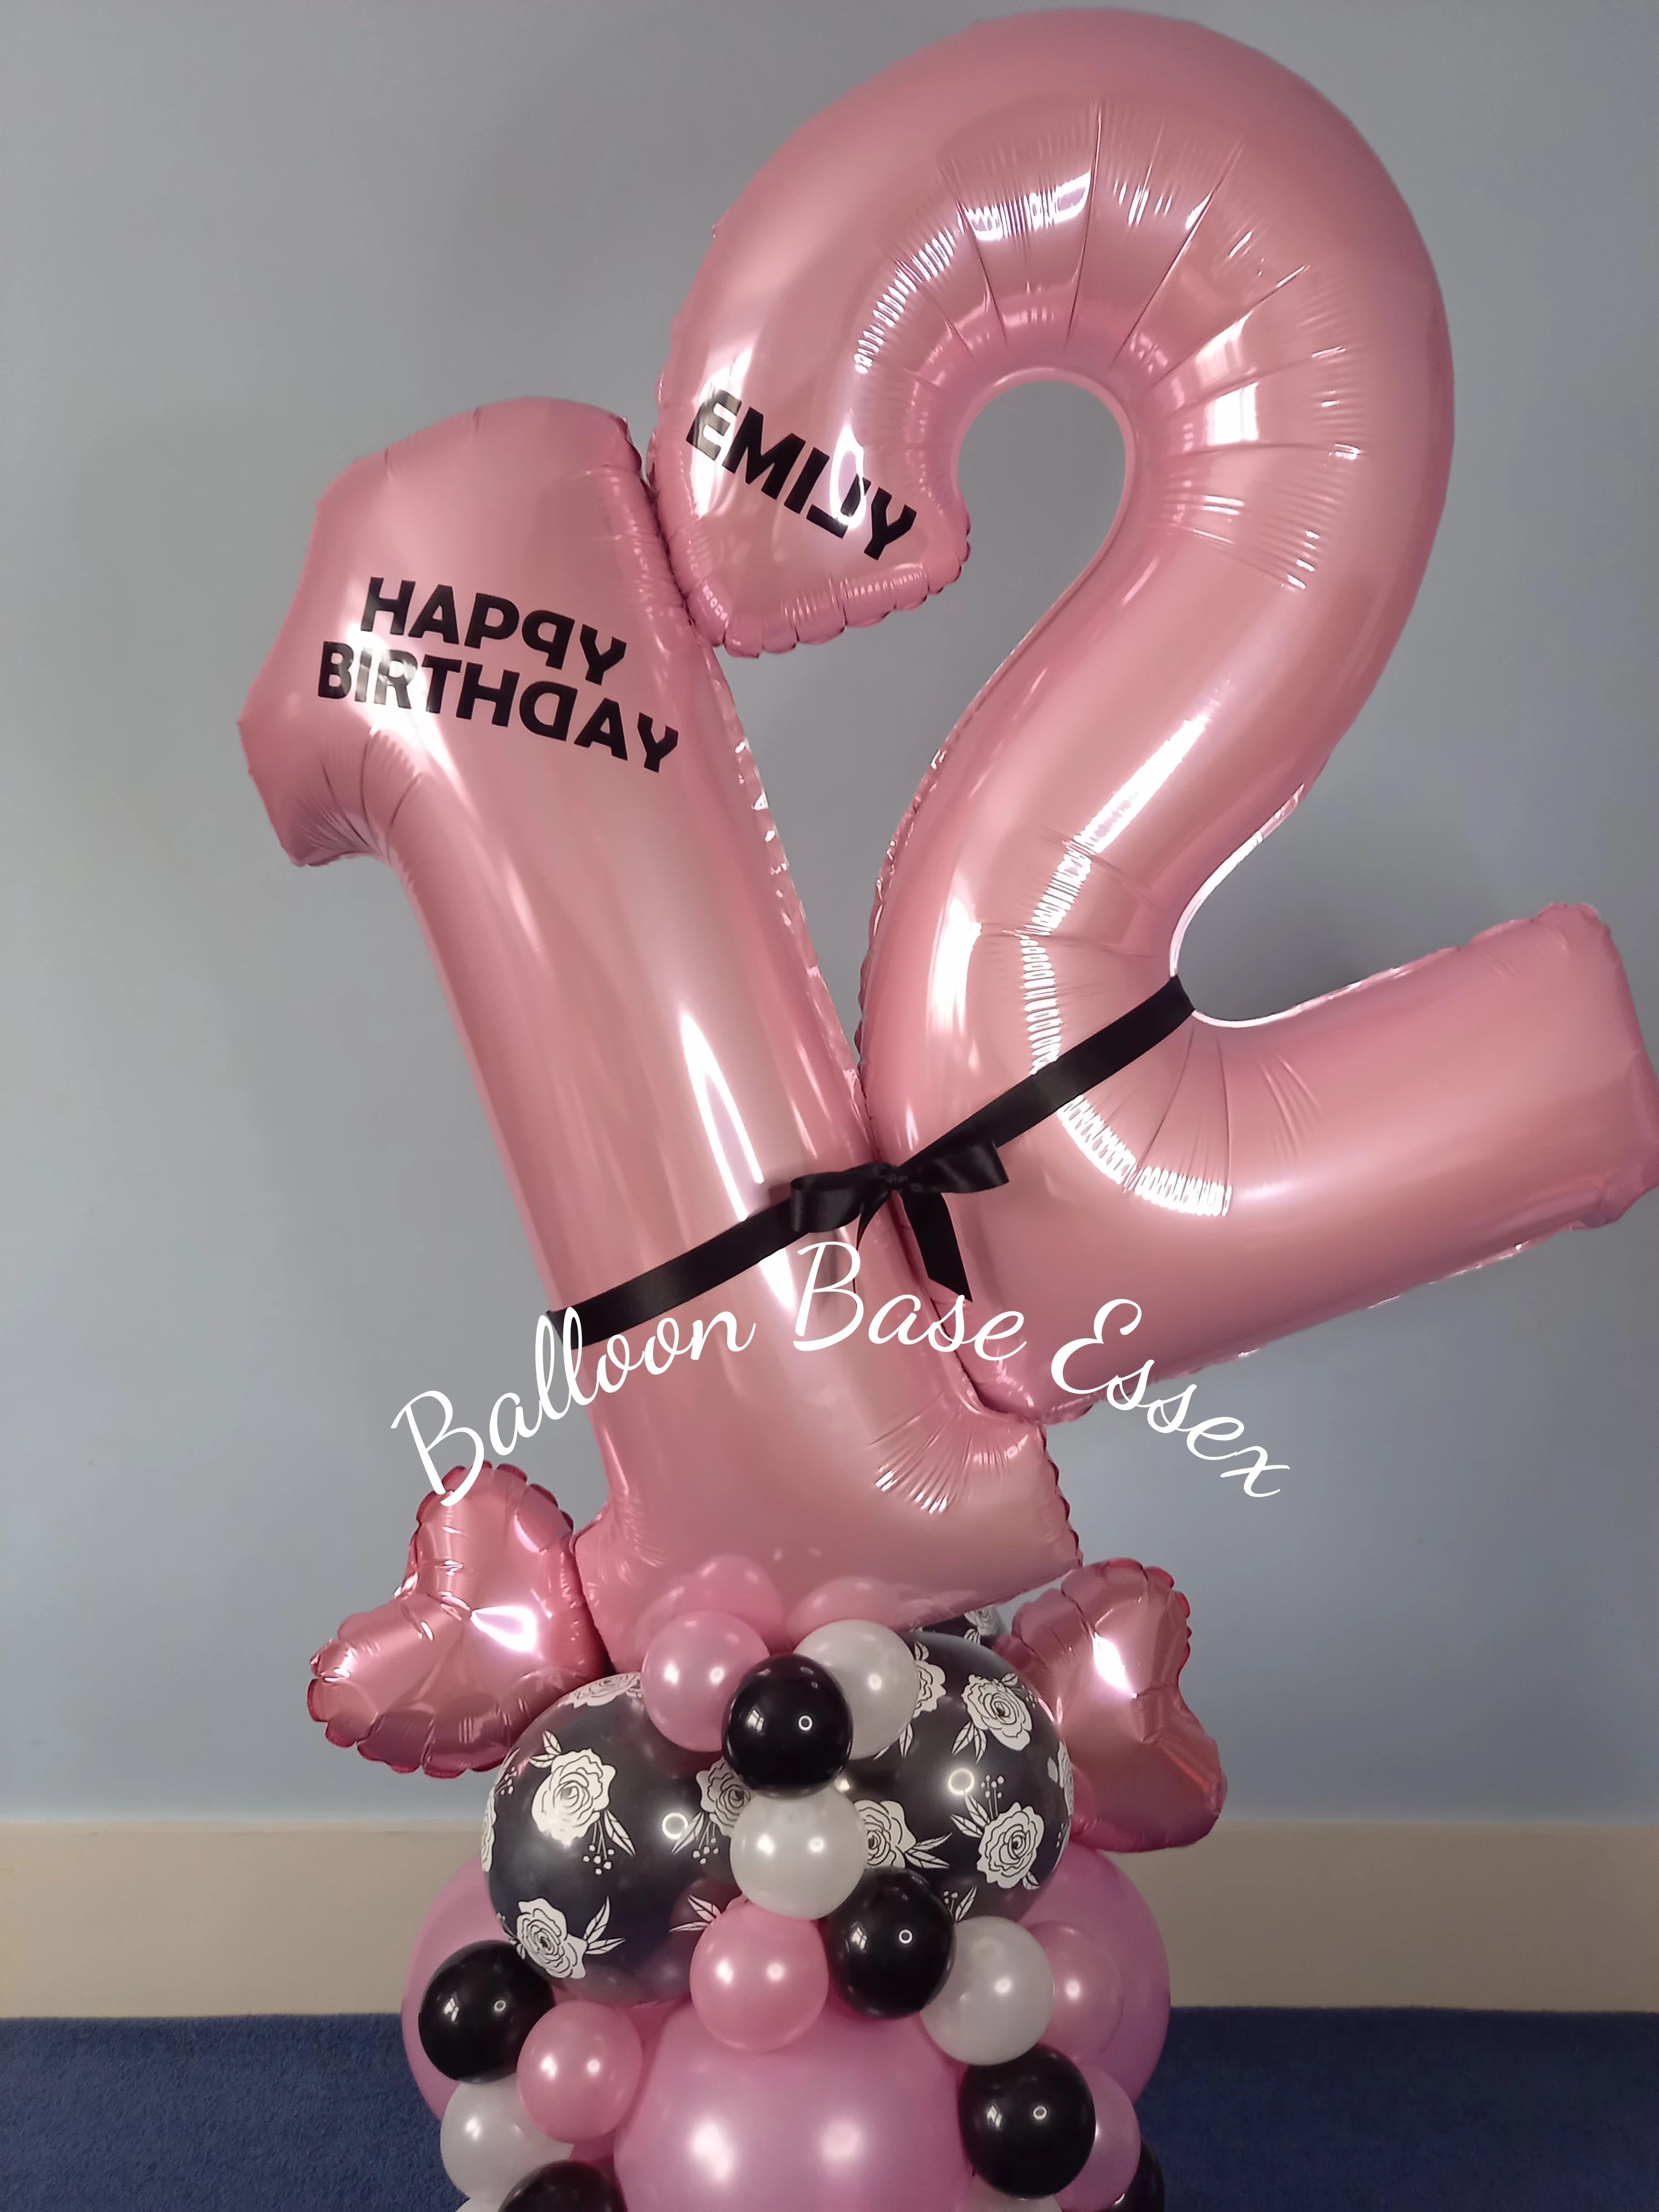 Personalised pink and black balloons for a 12th birthday